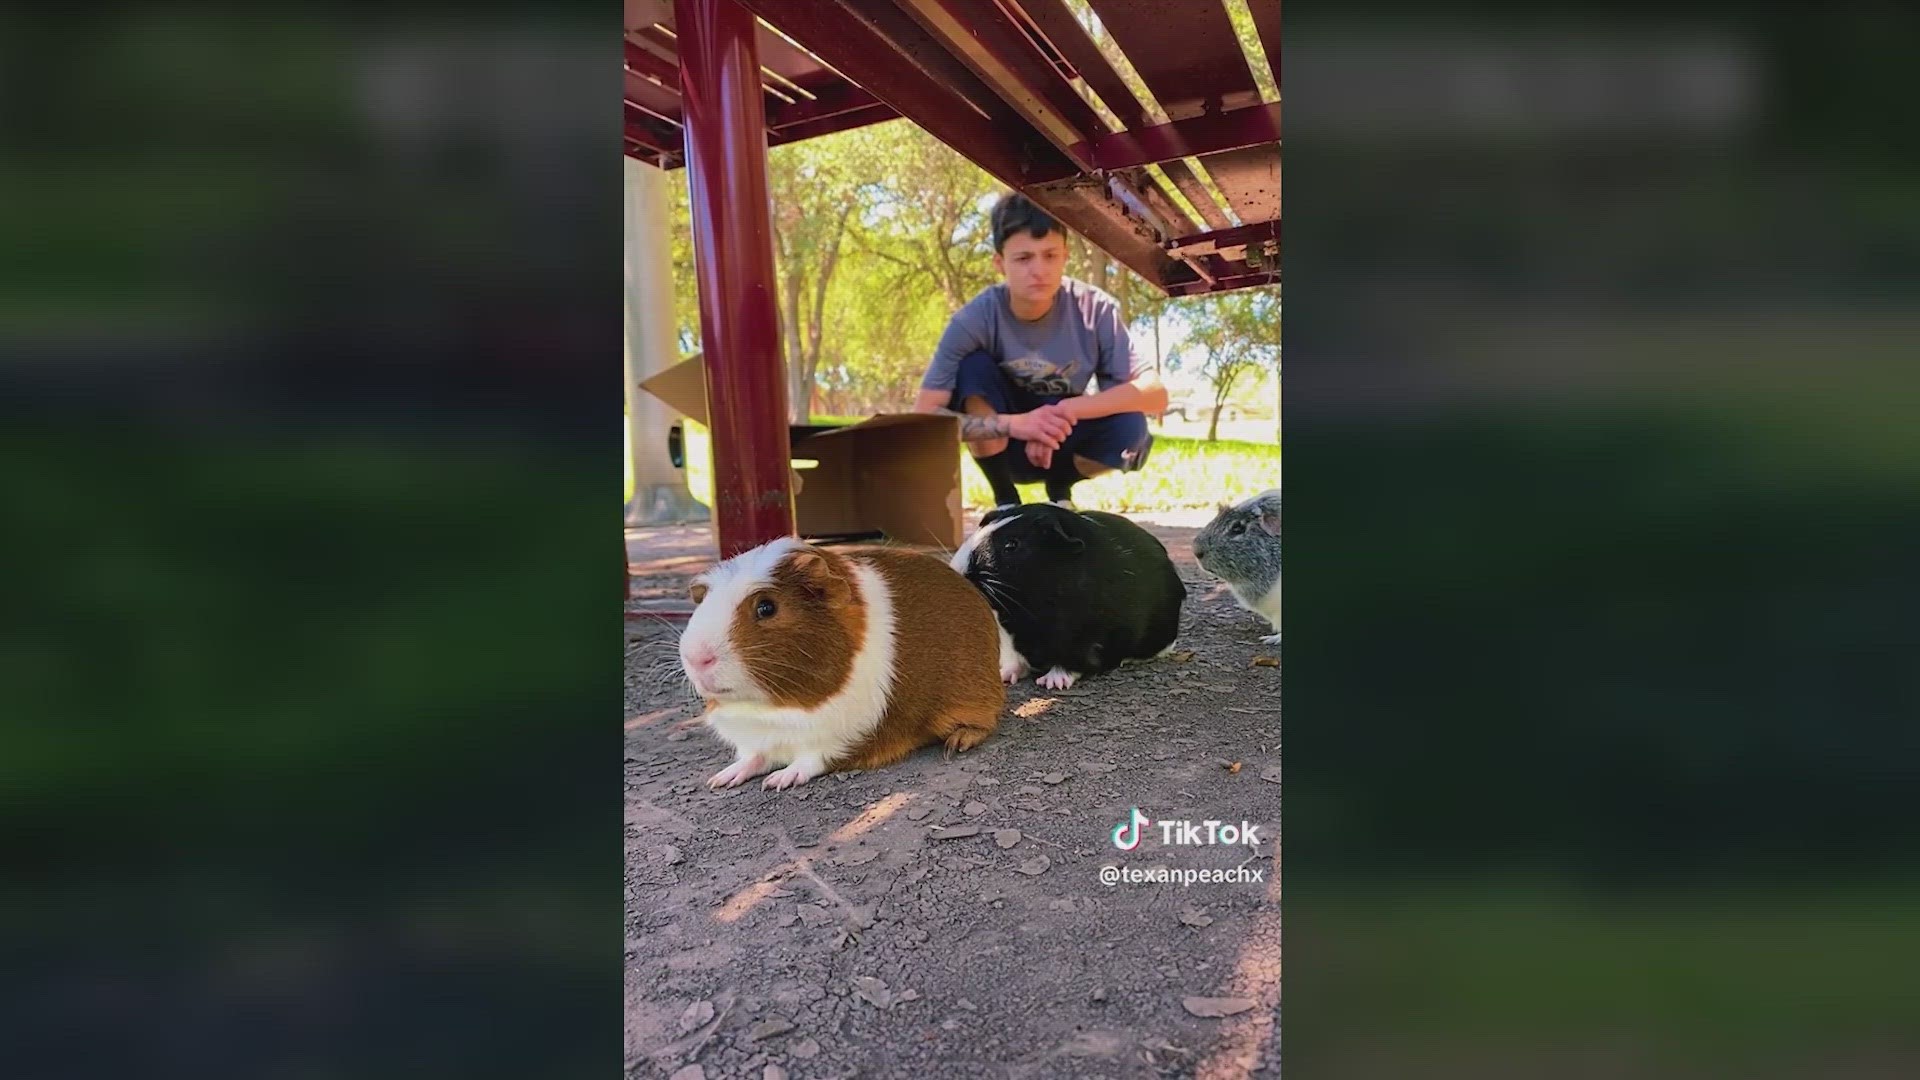 Animal rescue experts say Texas has an overpopulation of guinea pigs, and all small animal shelters are bursting at the seams.